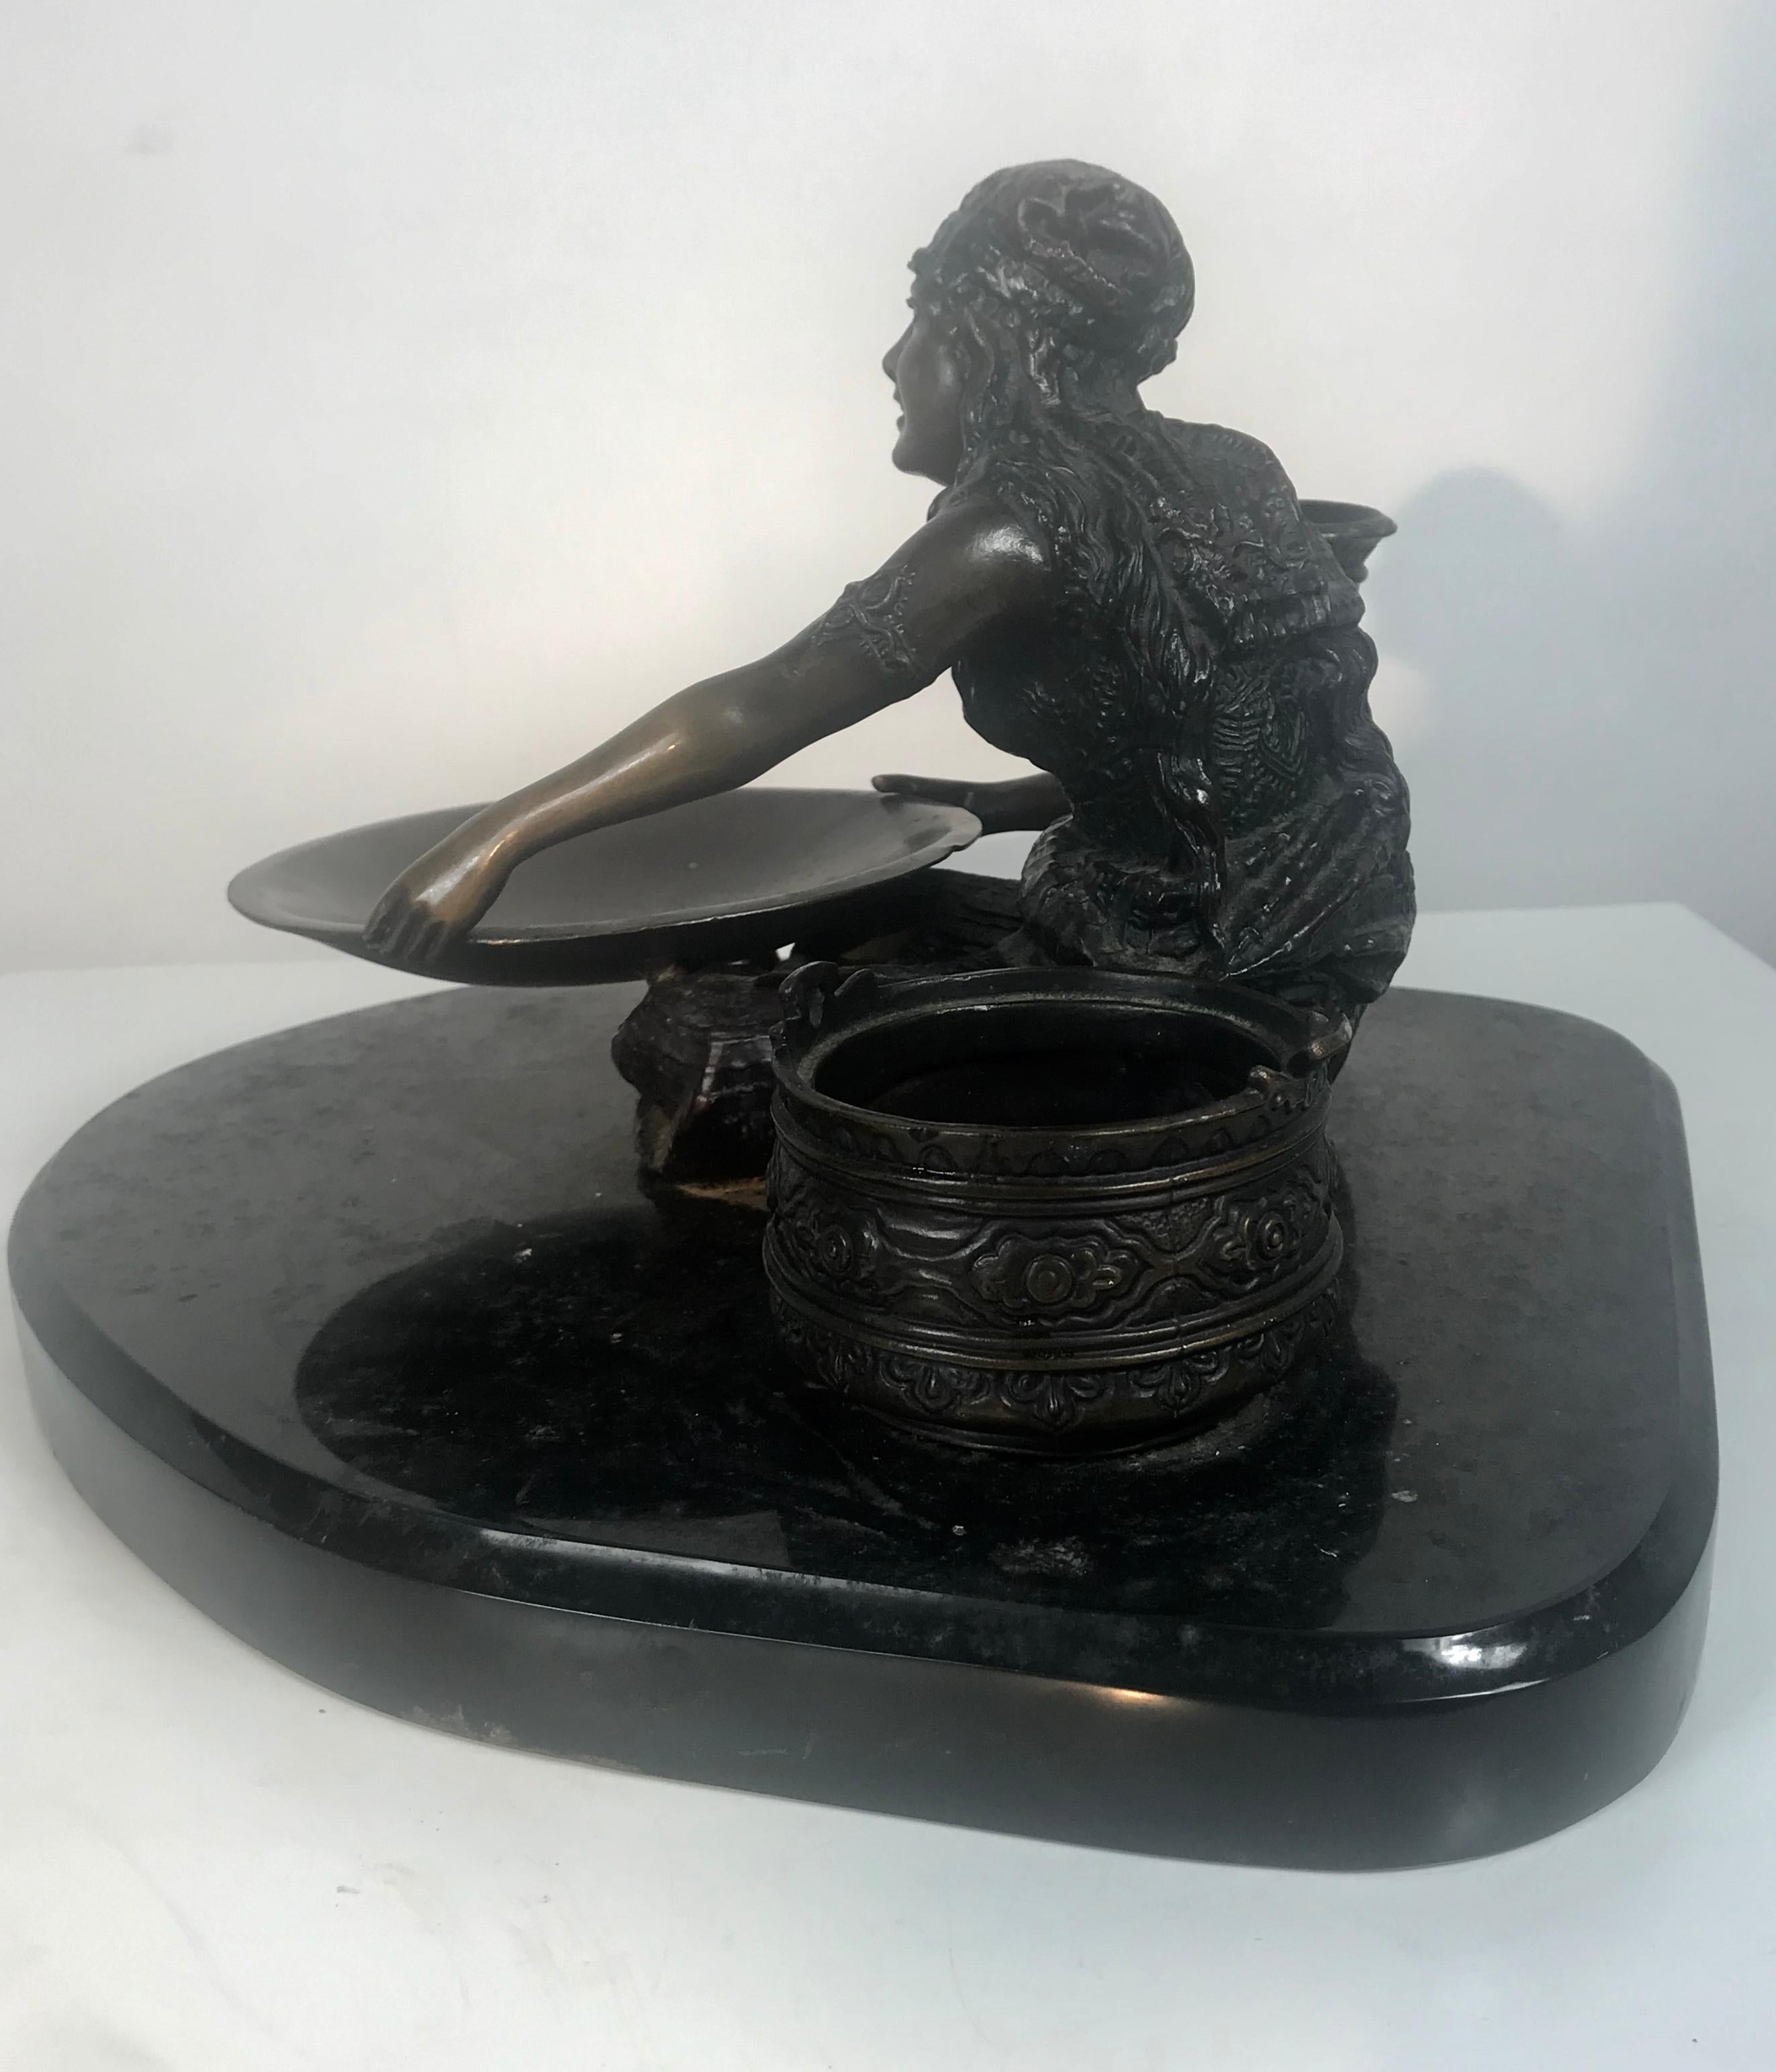 Orientalist Vienna Bronze Sculpture by Franz Xaver Bergmann ‘NAM GREB’ Signed In Excellent Condition For Sale In Buffalo, NY